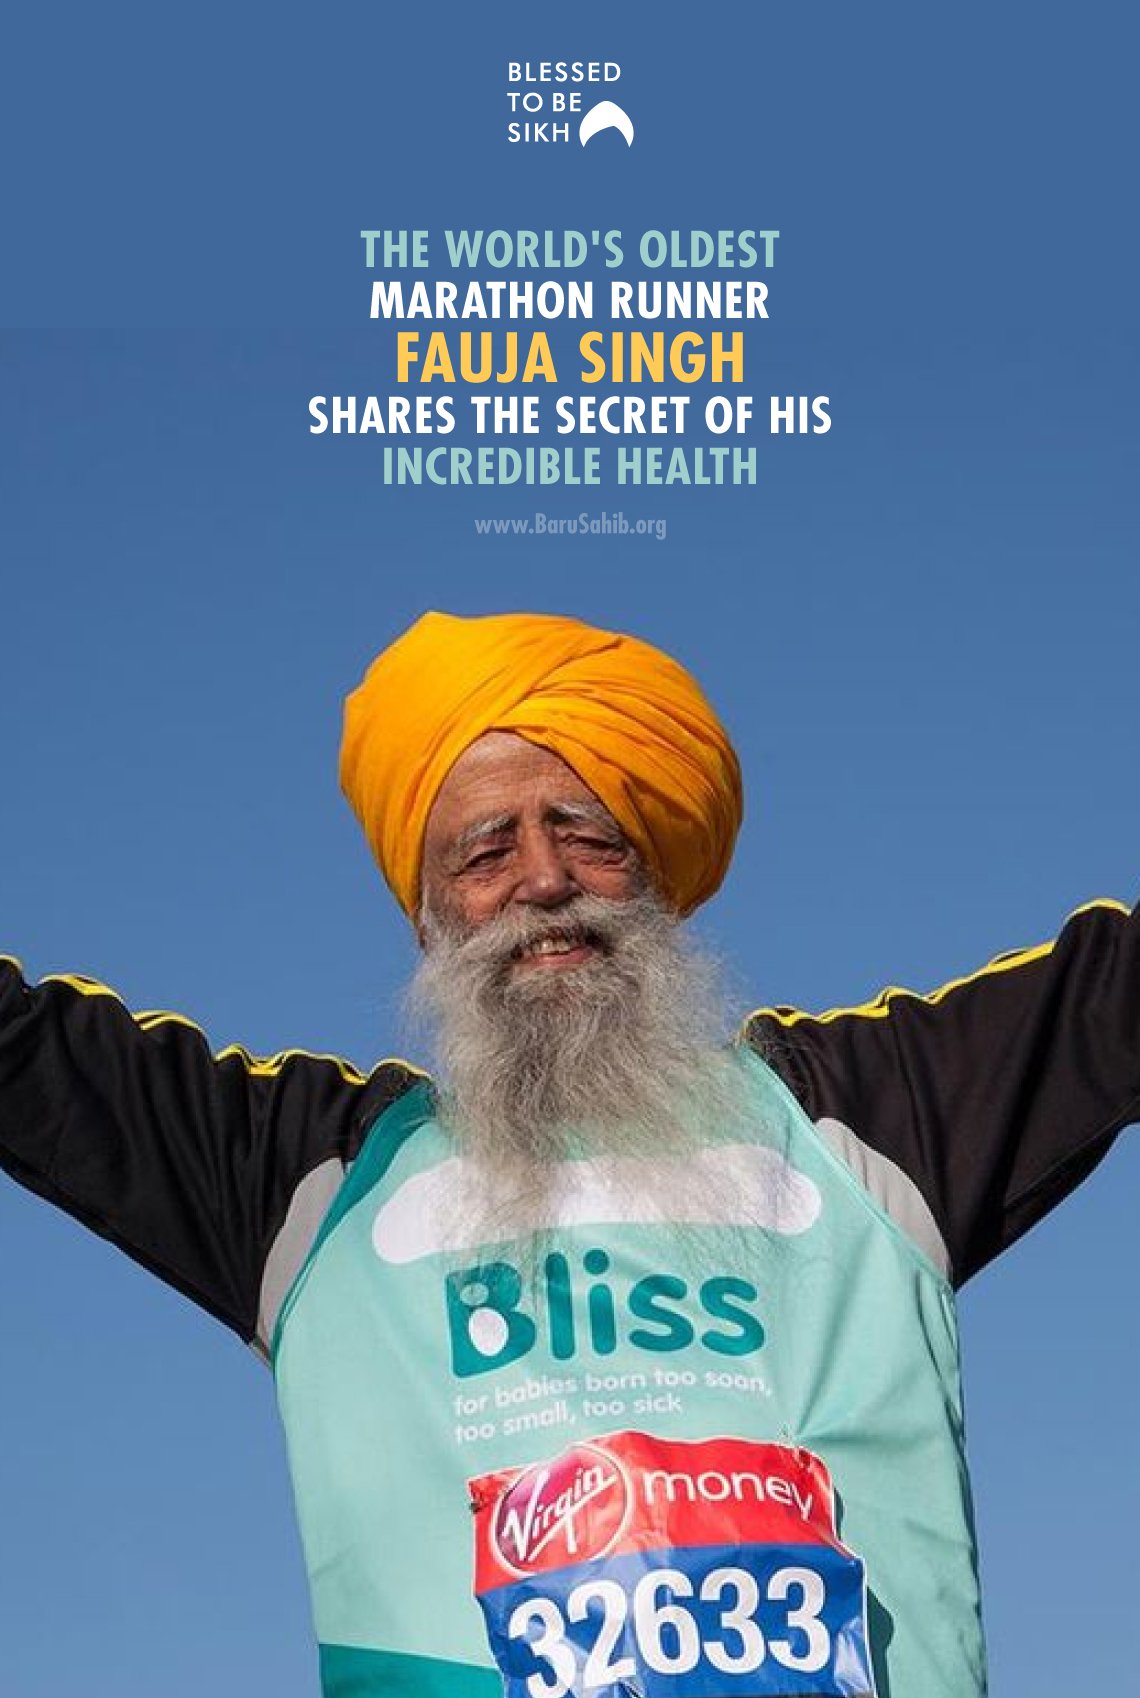 The World's Oldest Marathon Runner FAUJA SINGH shares the secret of his